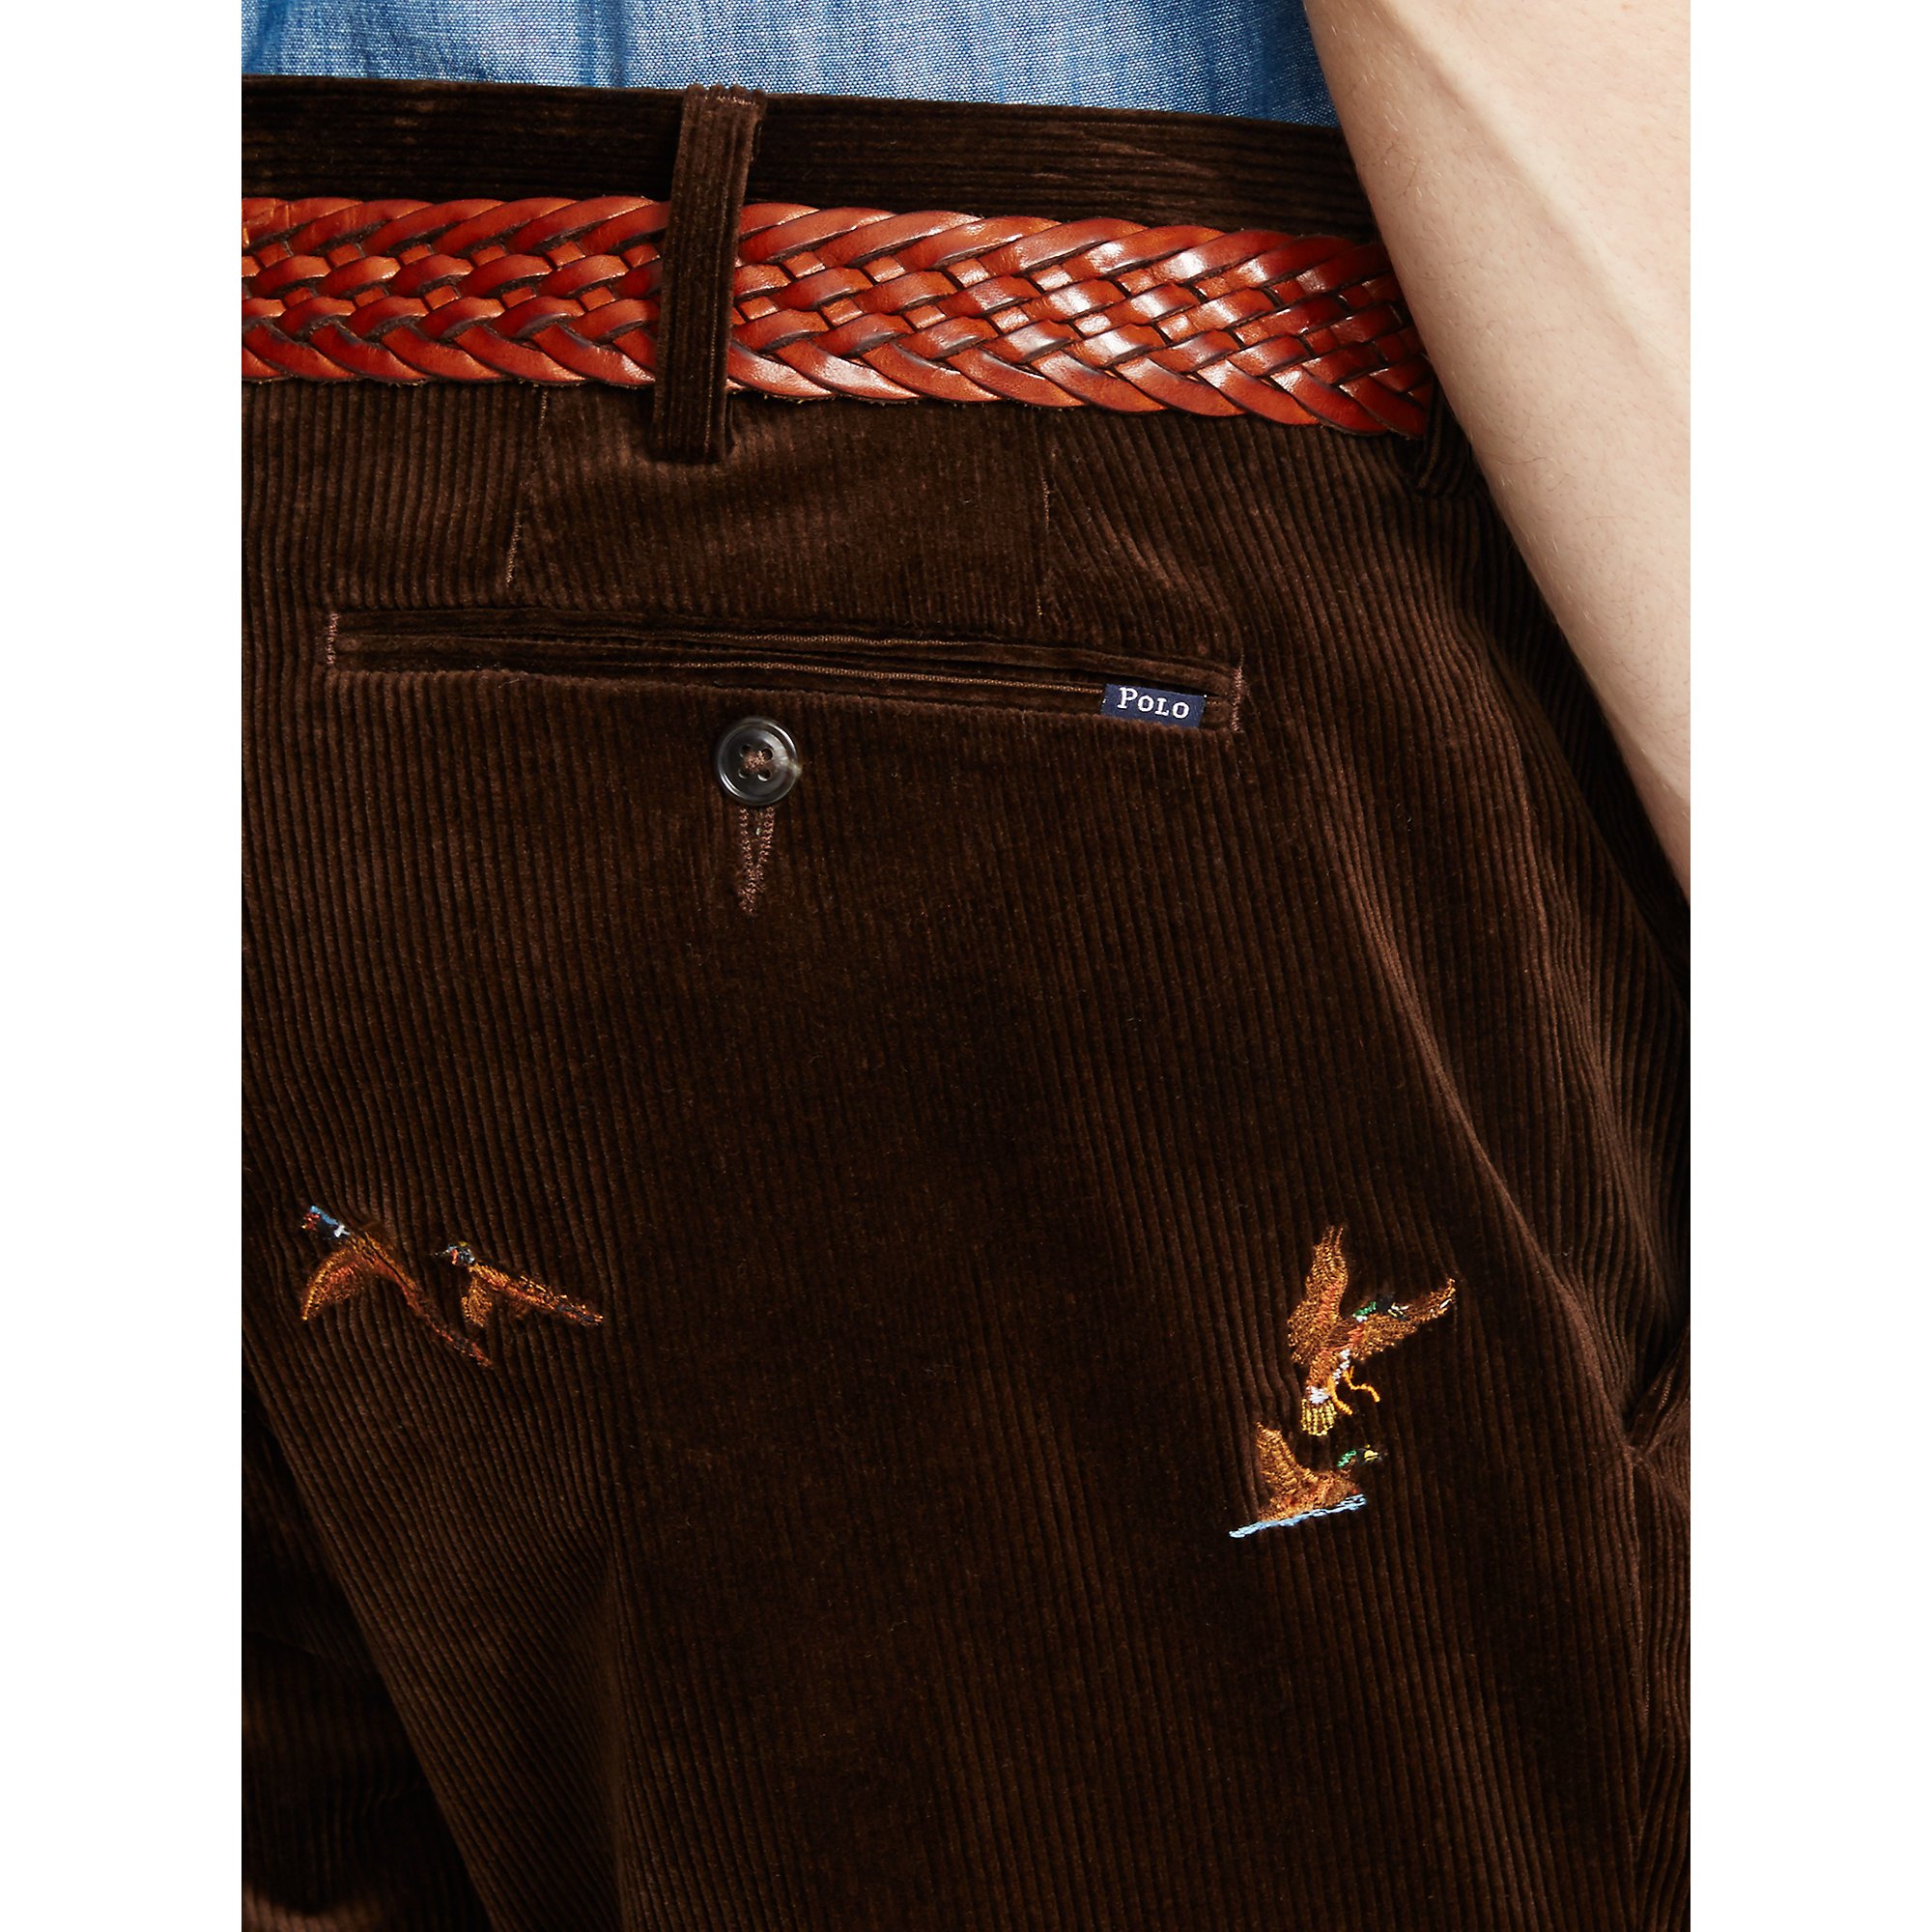 Polo Ralph Lauren Classic Embroidered Corduroy in Brown for Men - Lyst